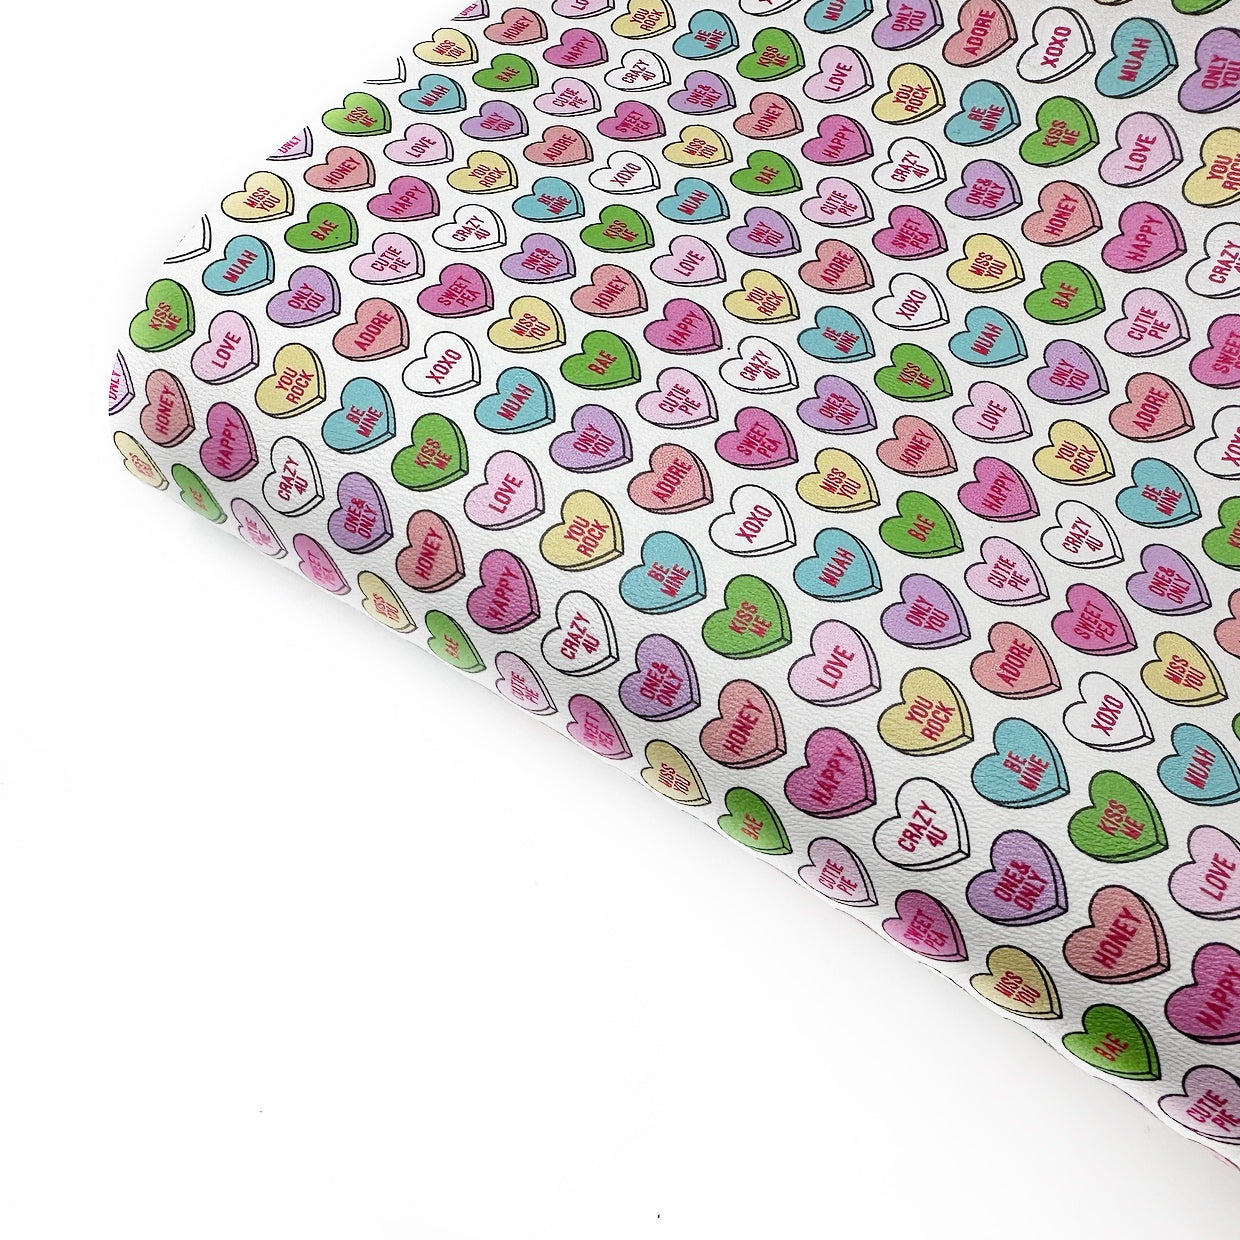 Rainbow Conversation Candy Hearts Premium Faux Leather Fabric Sheets